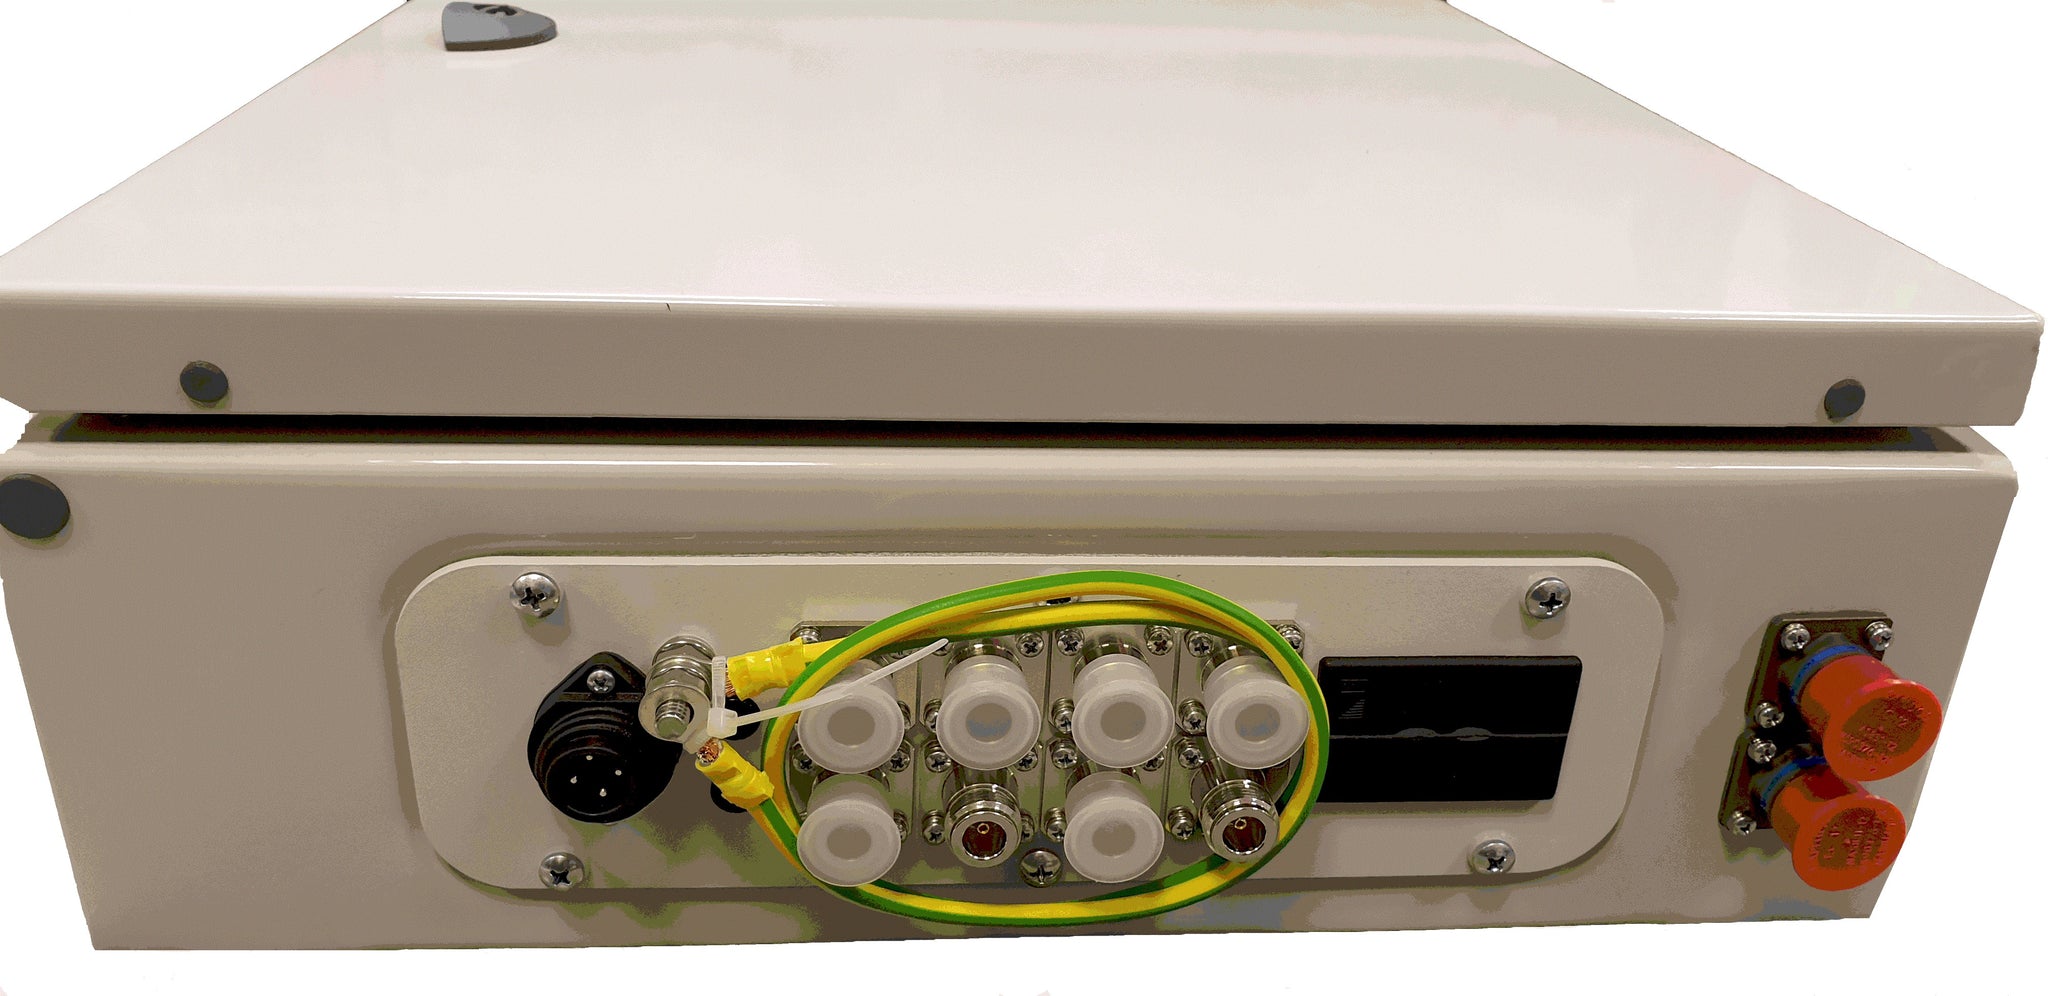 G5500 Series Outdoor Unit (ODU) for Fiber Optic Interfacility Links